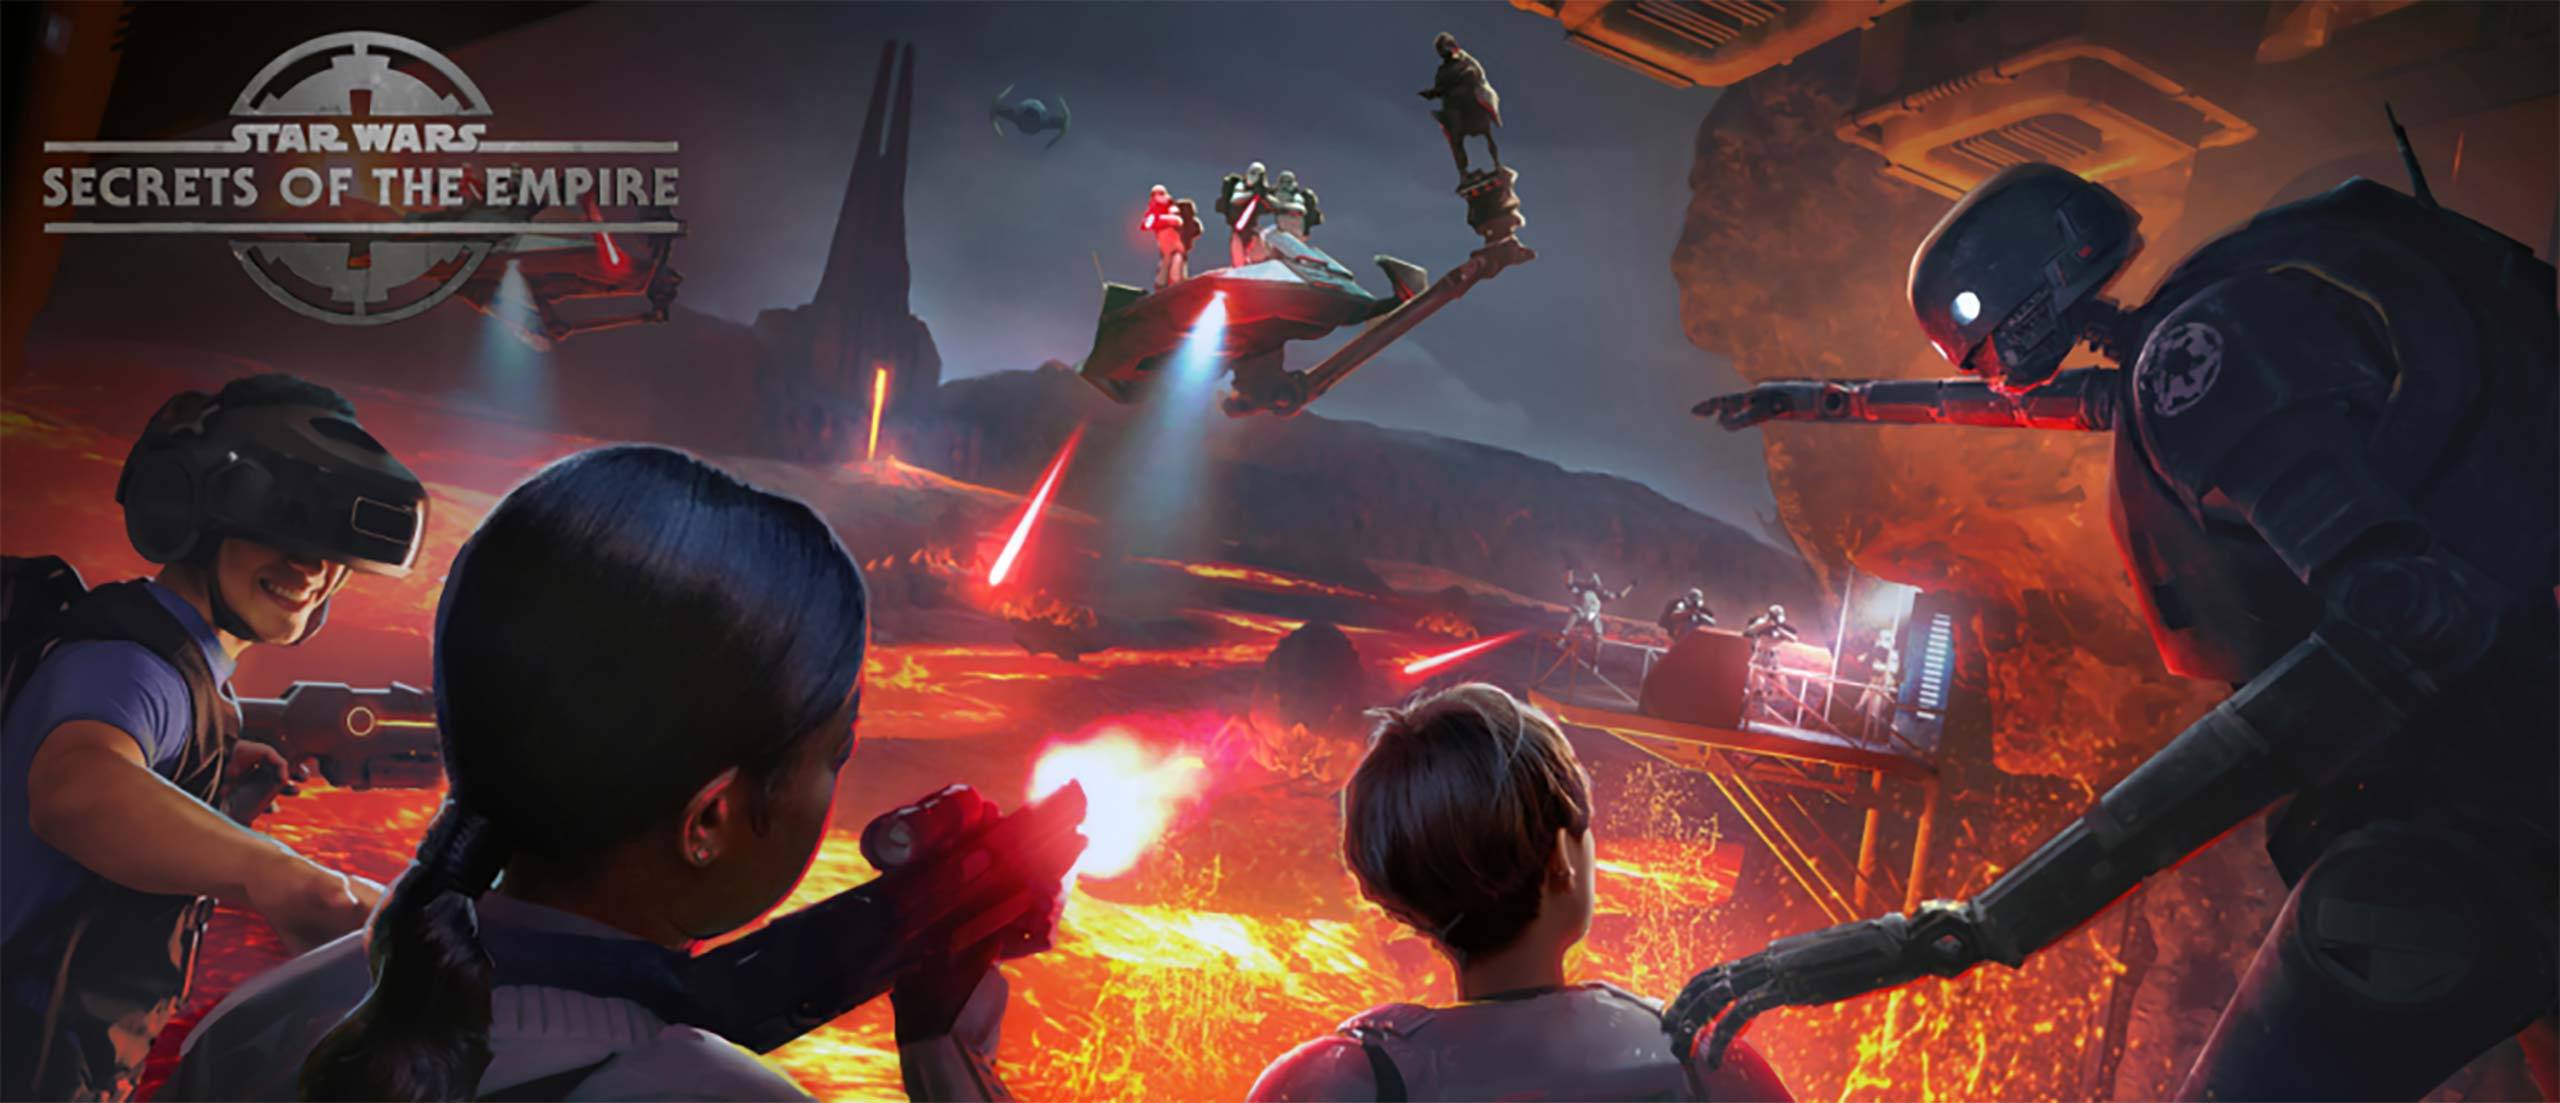 Star Wars - Secrets of the Empire Hyper-Reality Experience gets an opening date and tickets are available now